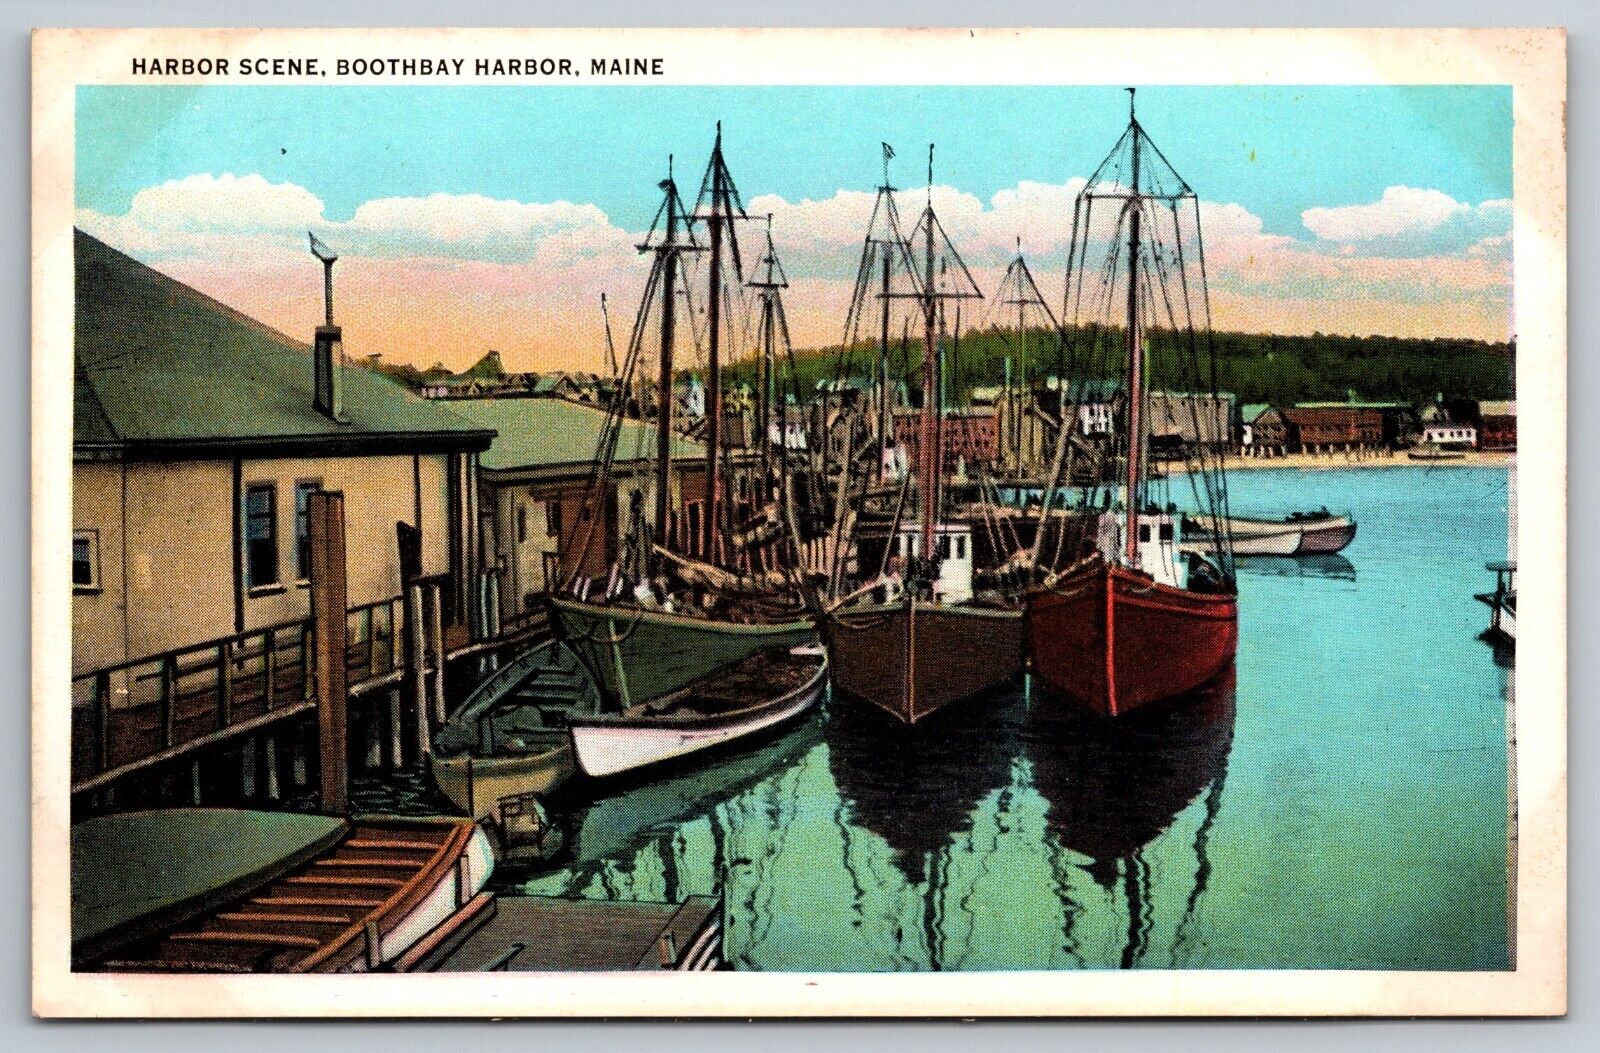 Harbor Scene with Boats. Boothbay Harbor, Maine. Vintage Postcard